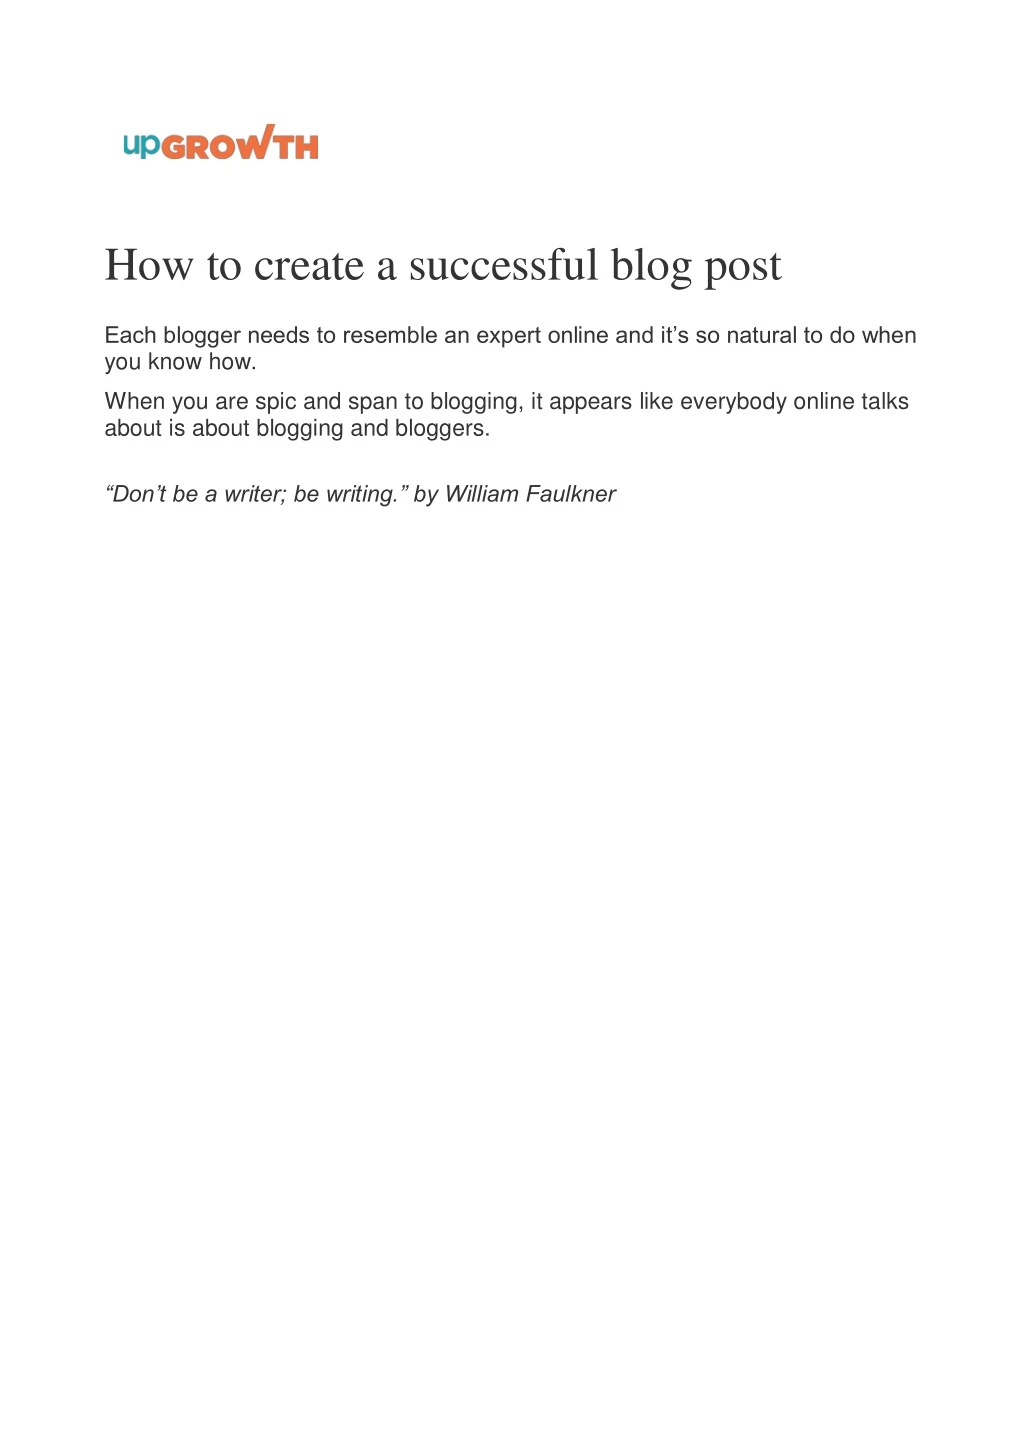 how to create a successful blog post